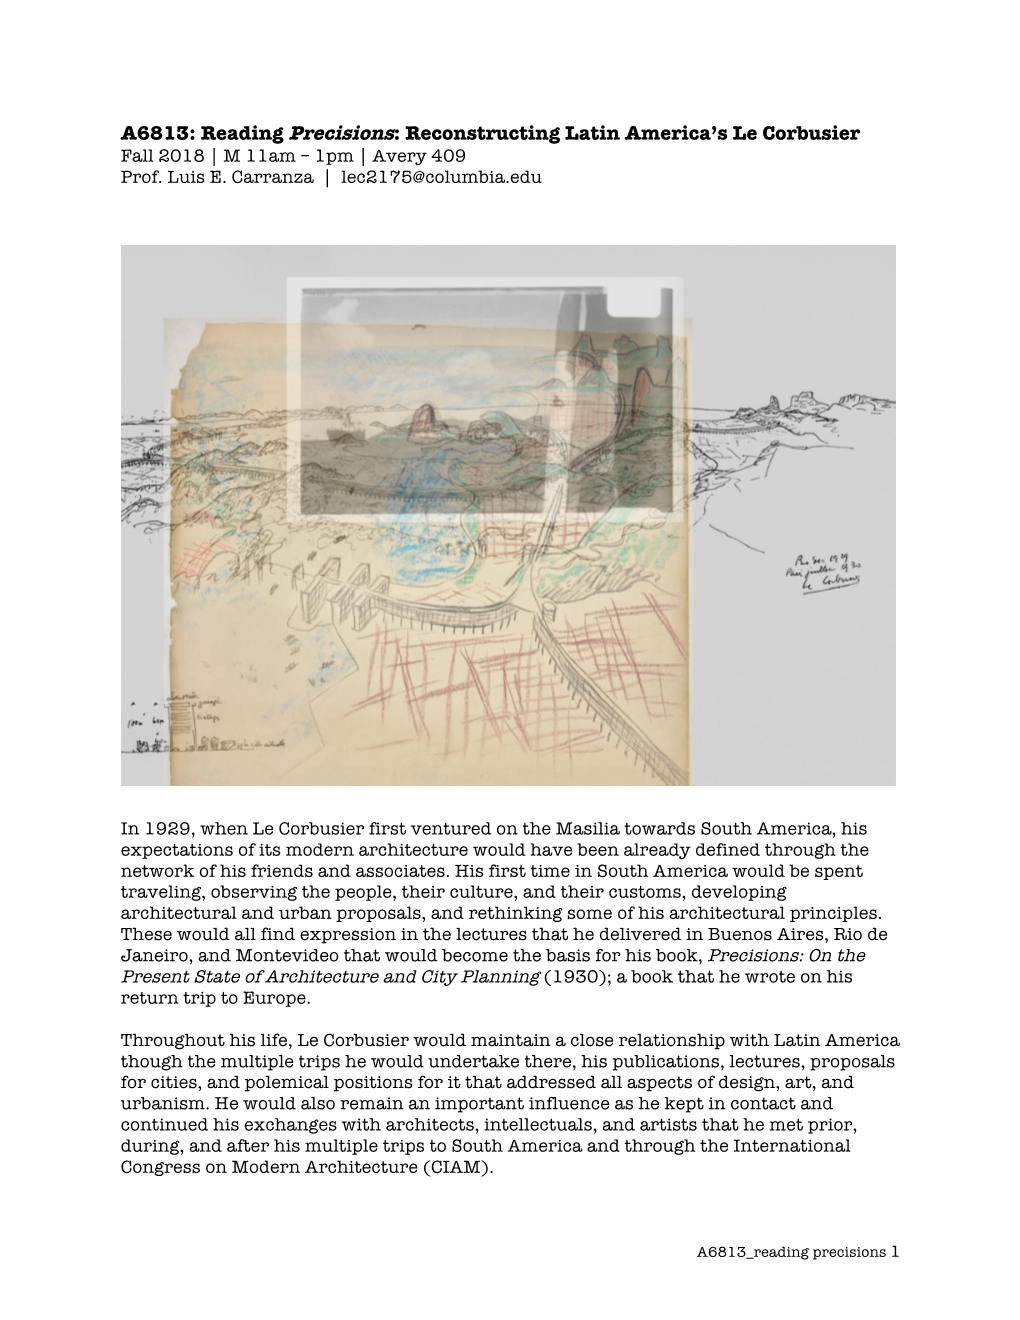 A6813 Reading Precisions 1 the Seminar Will Examine the Impact and Expression of Latin America on Le Corbusier and the Le Corbusier That Latin America Understood